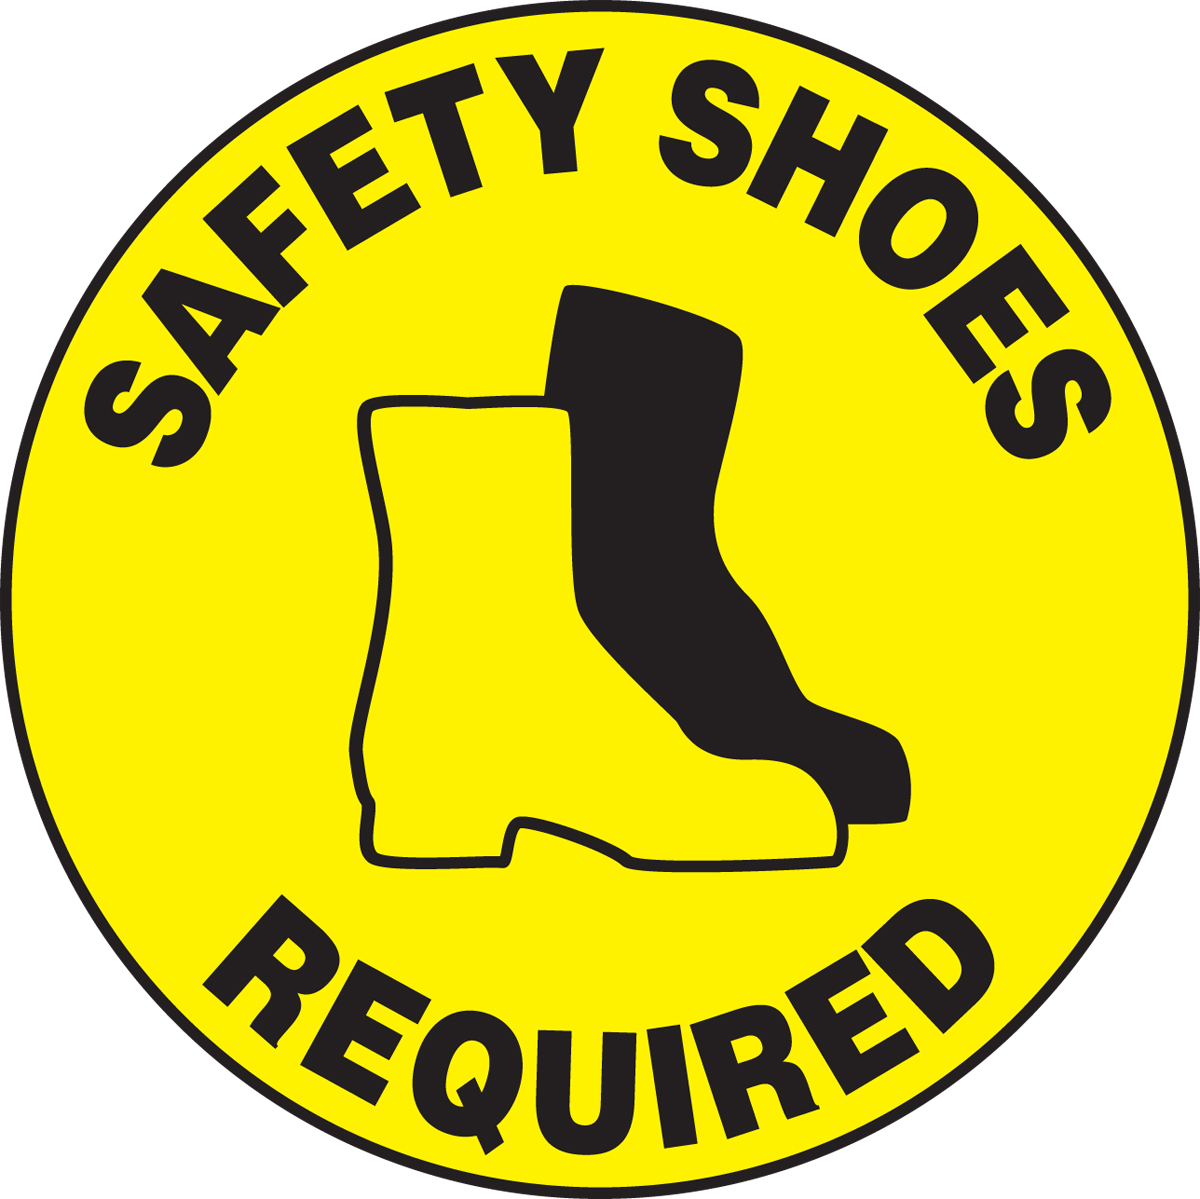 SAFETY SHOES REQUIRED